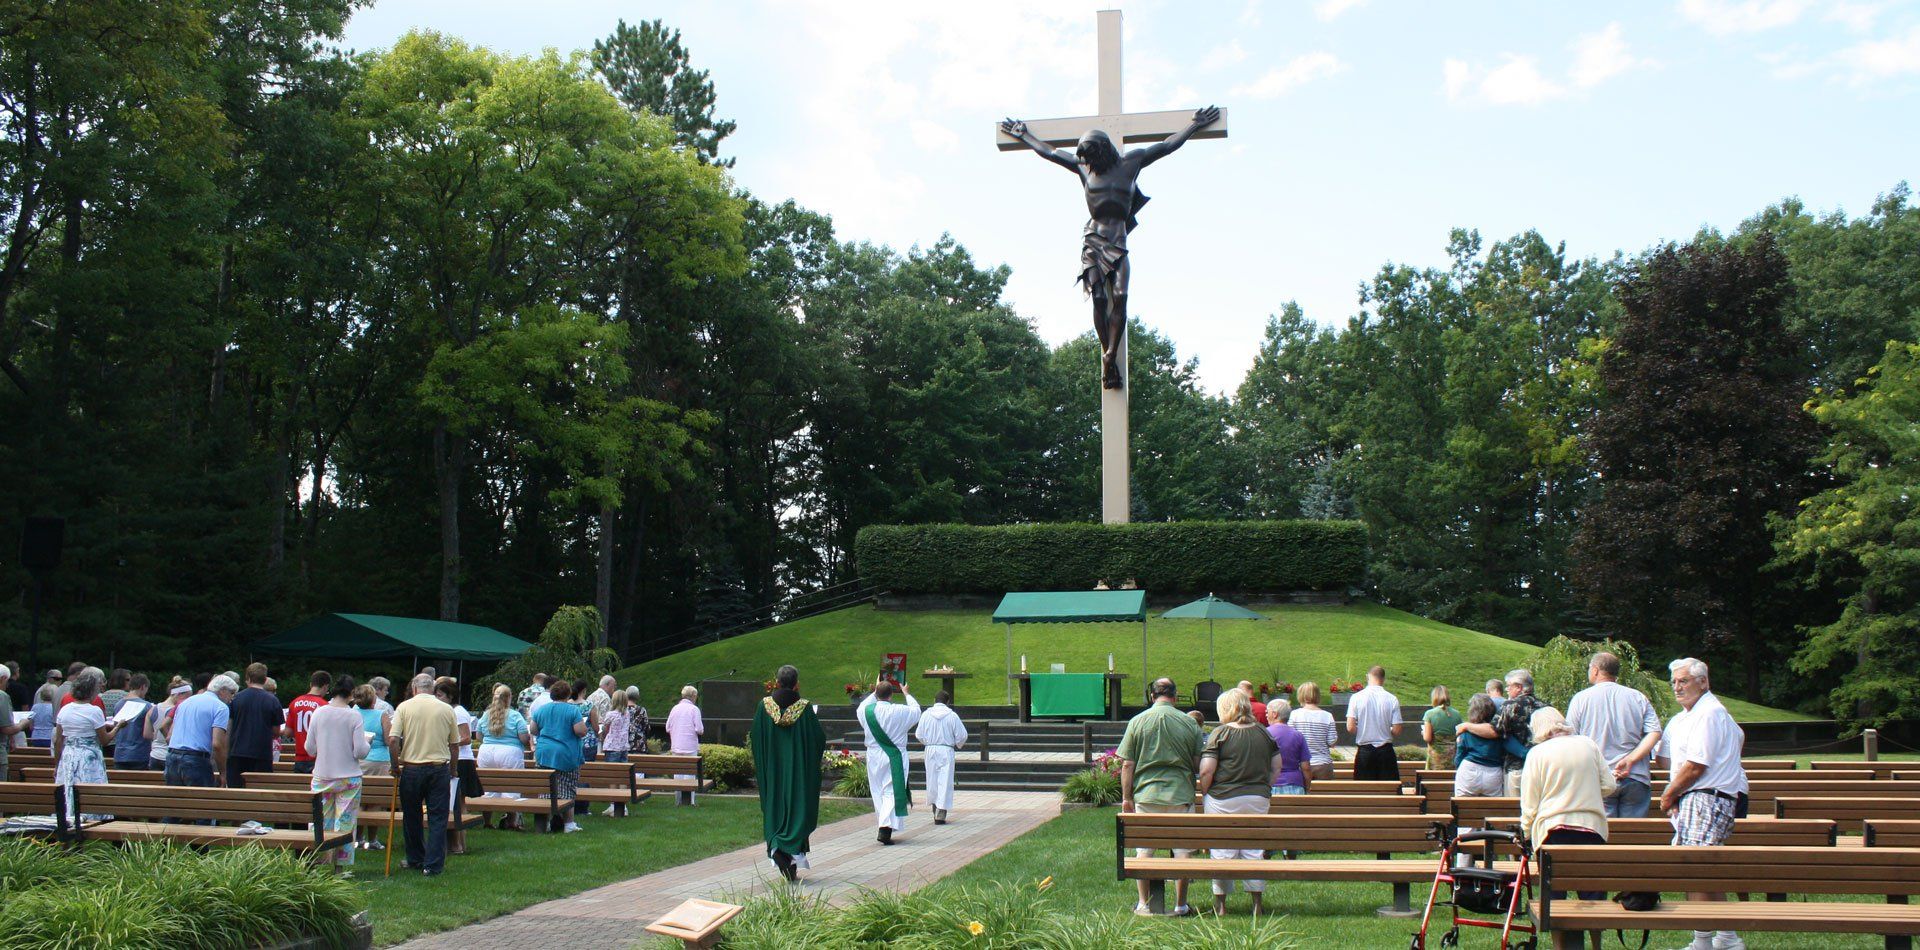 World’s Largest Crucifix (carved from a single tree): world record in Indian River, Michigan